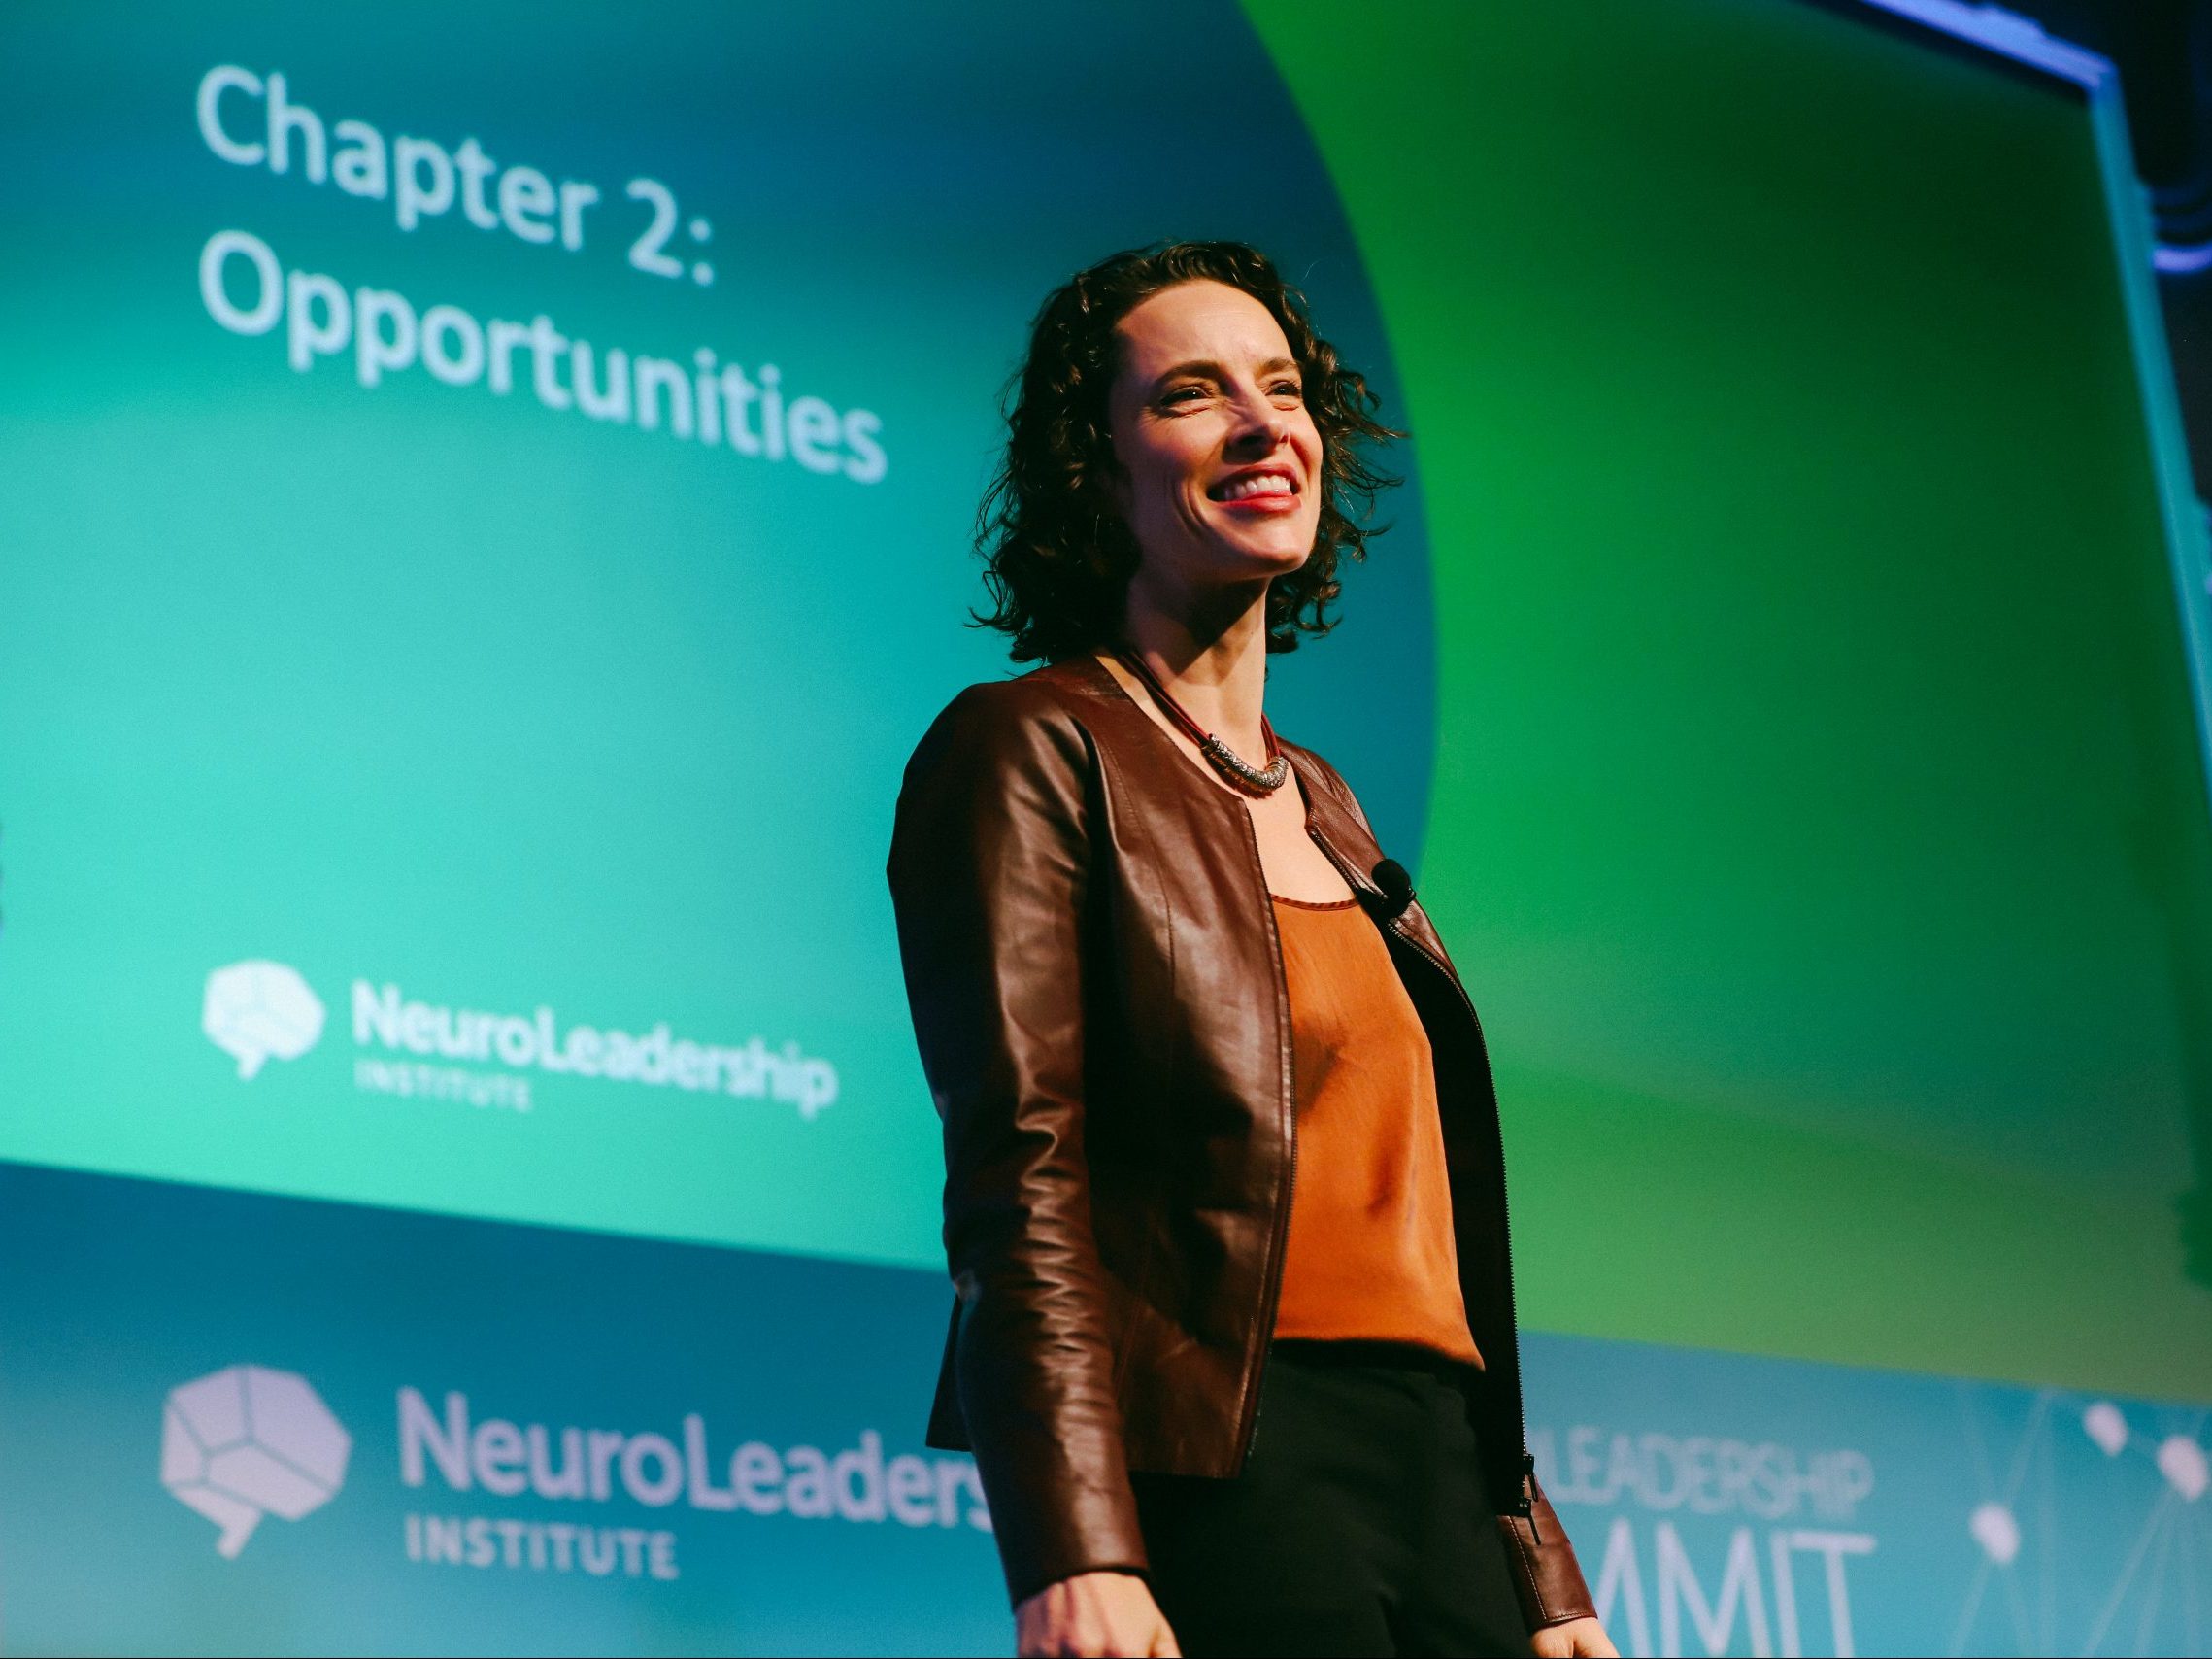 Lisa Rock, NLI's Co-found and CIO, at the 2019 Summit.